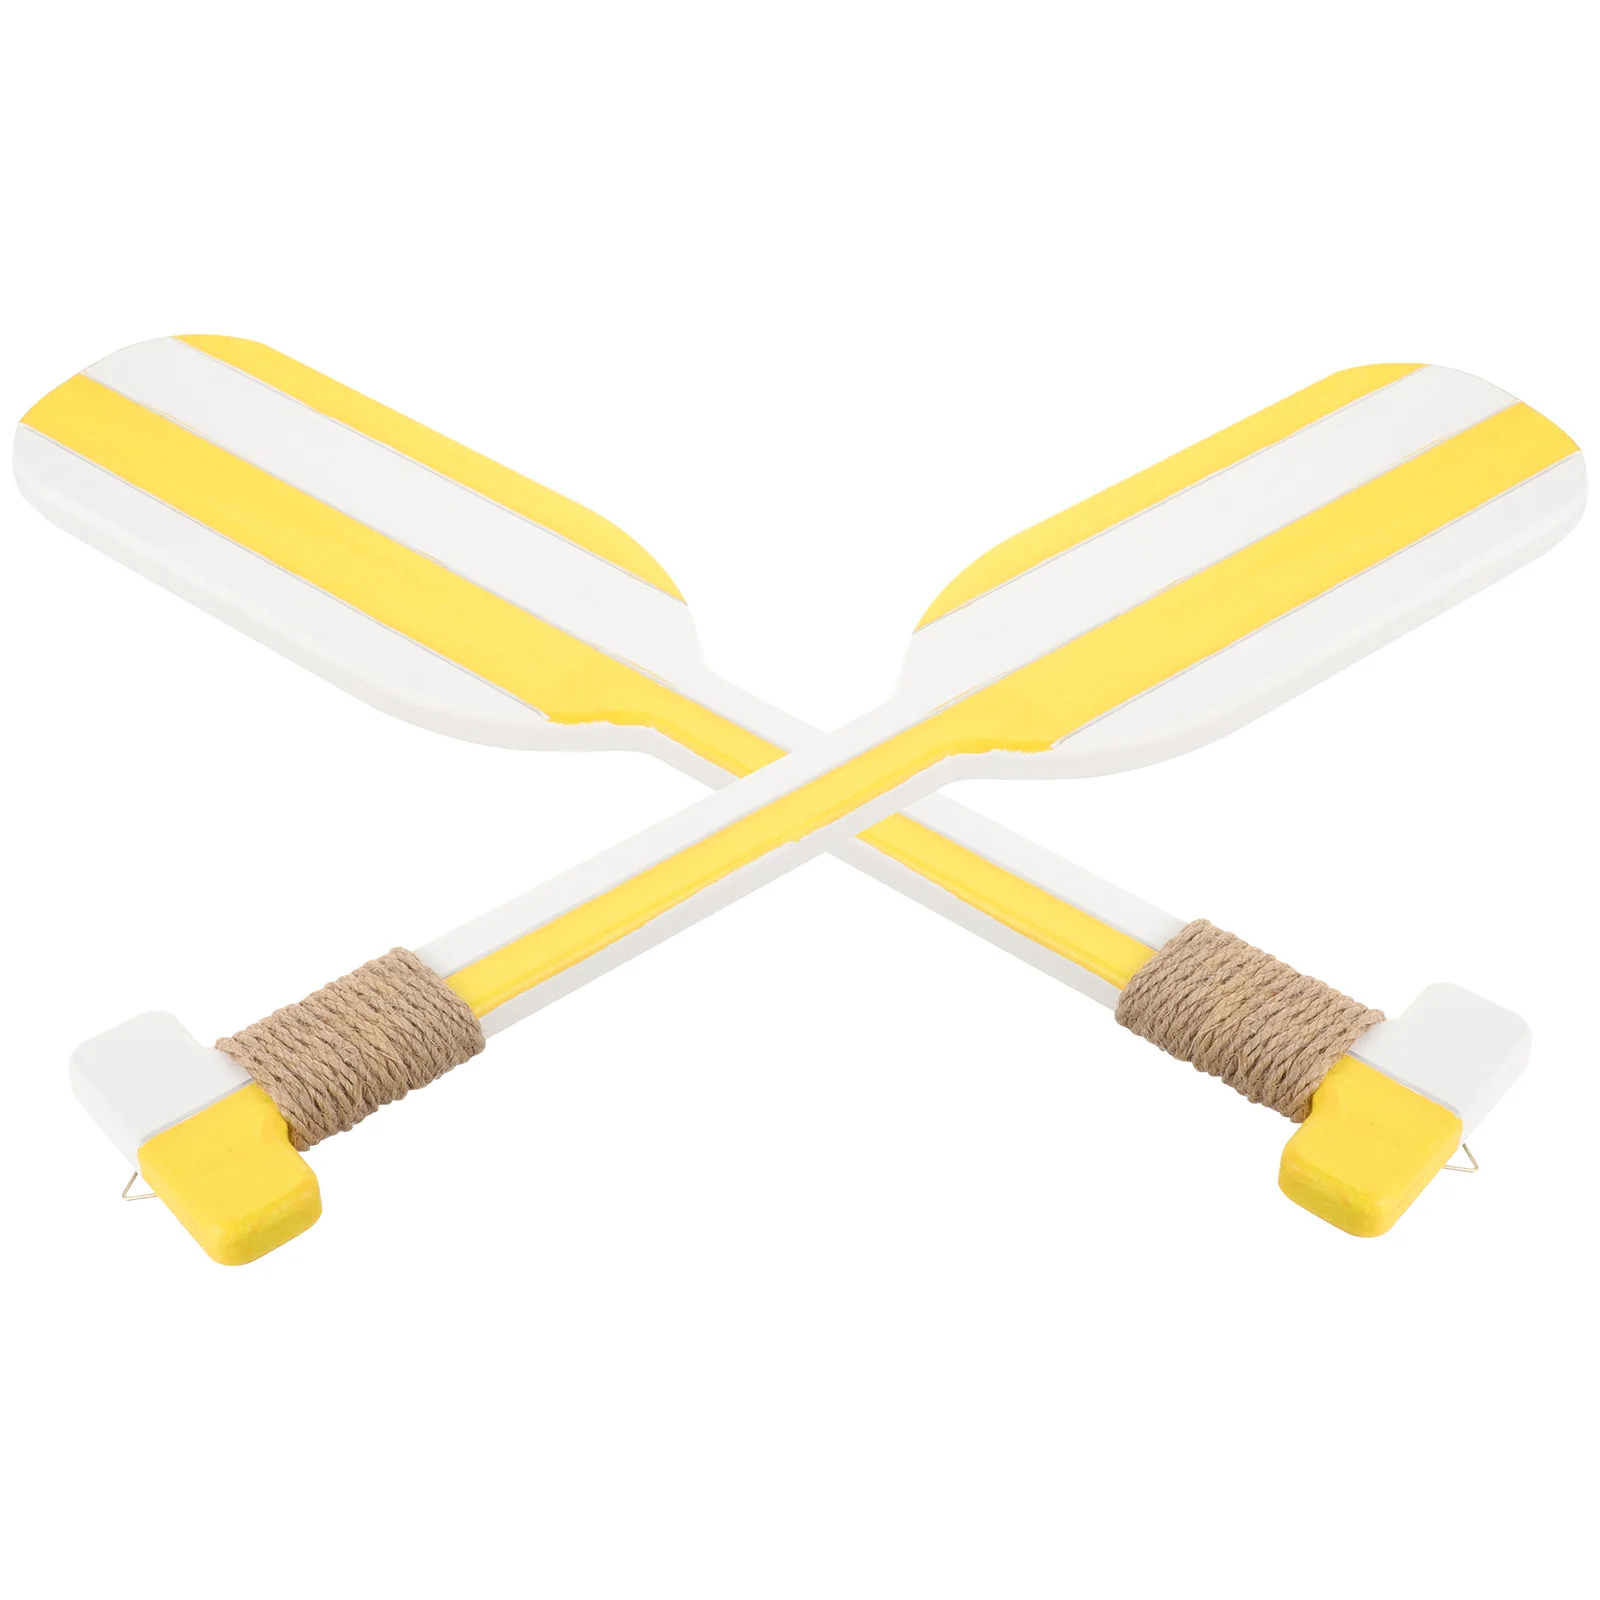 

2 Pcs Boat Oars Wooden Vintage Paddle Decoration Beach Wall Household Ornaments Hanging 50X10CM Yellow Mediterranean